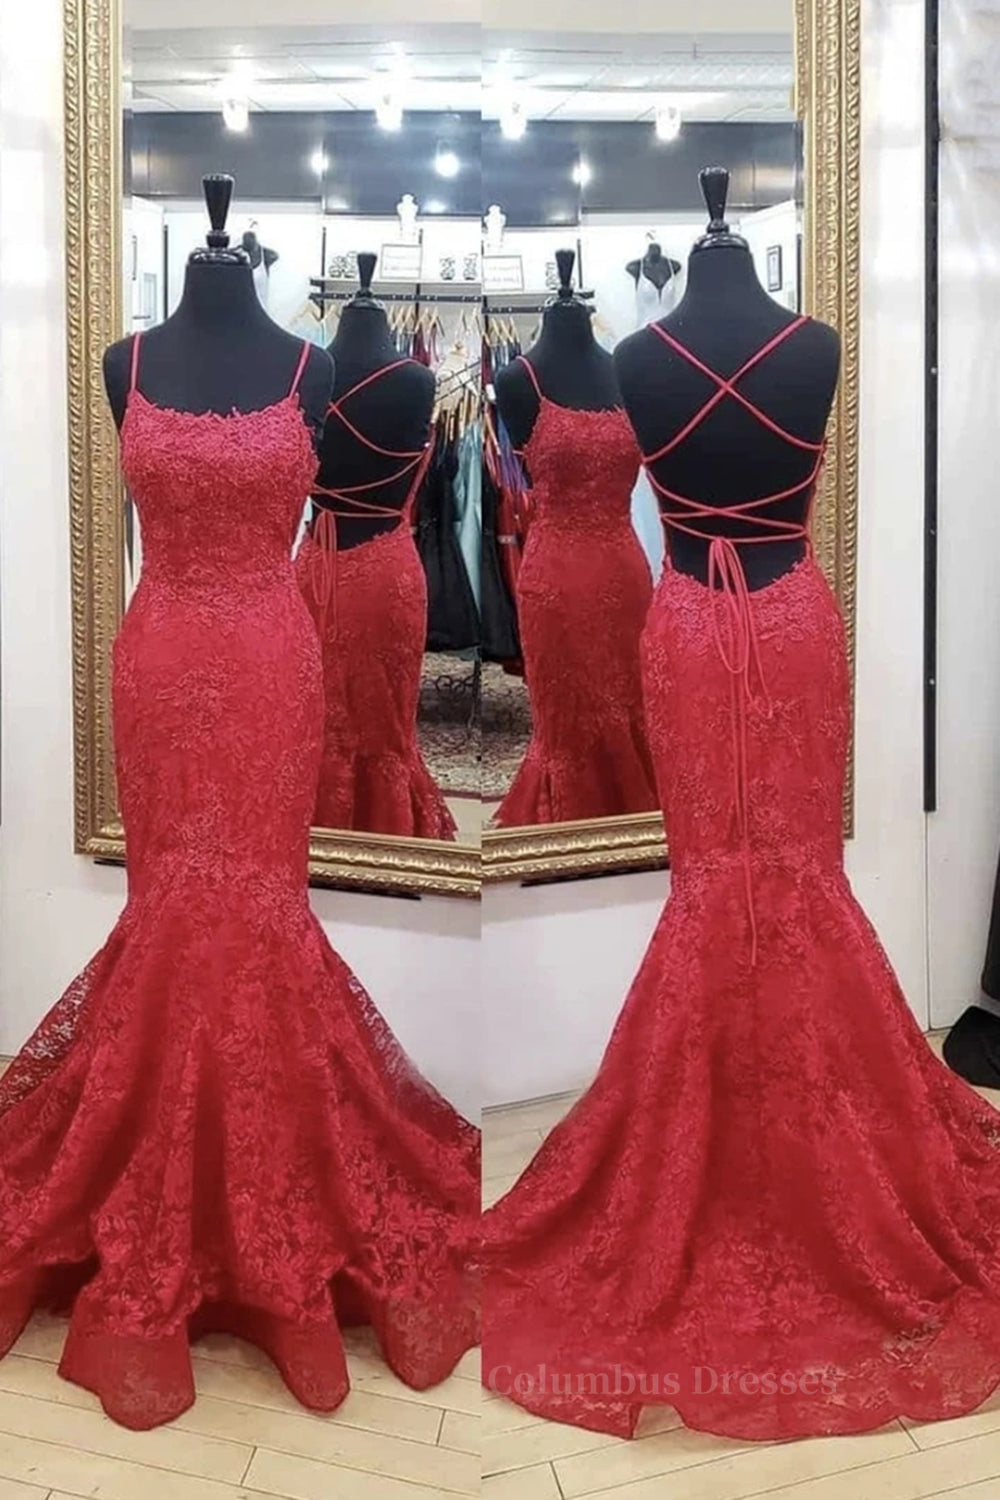 Bridesmaides Dresses Green, Backless Mermaid Red Lace Long Prom Dress, Mermaid Red Lace Formal Dress, Red Lace Evening Dress